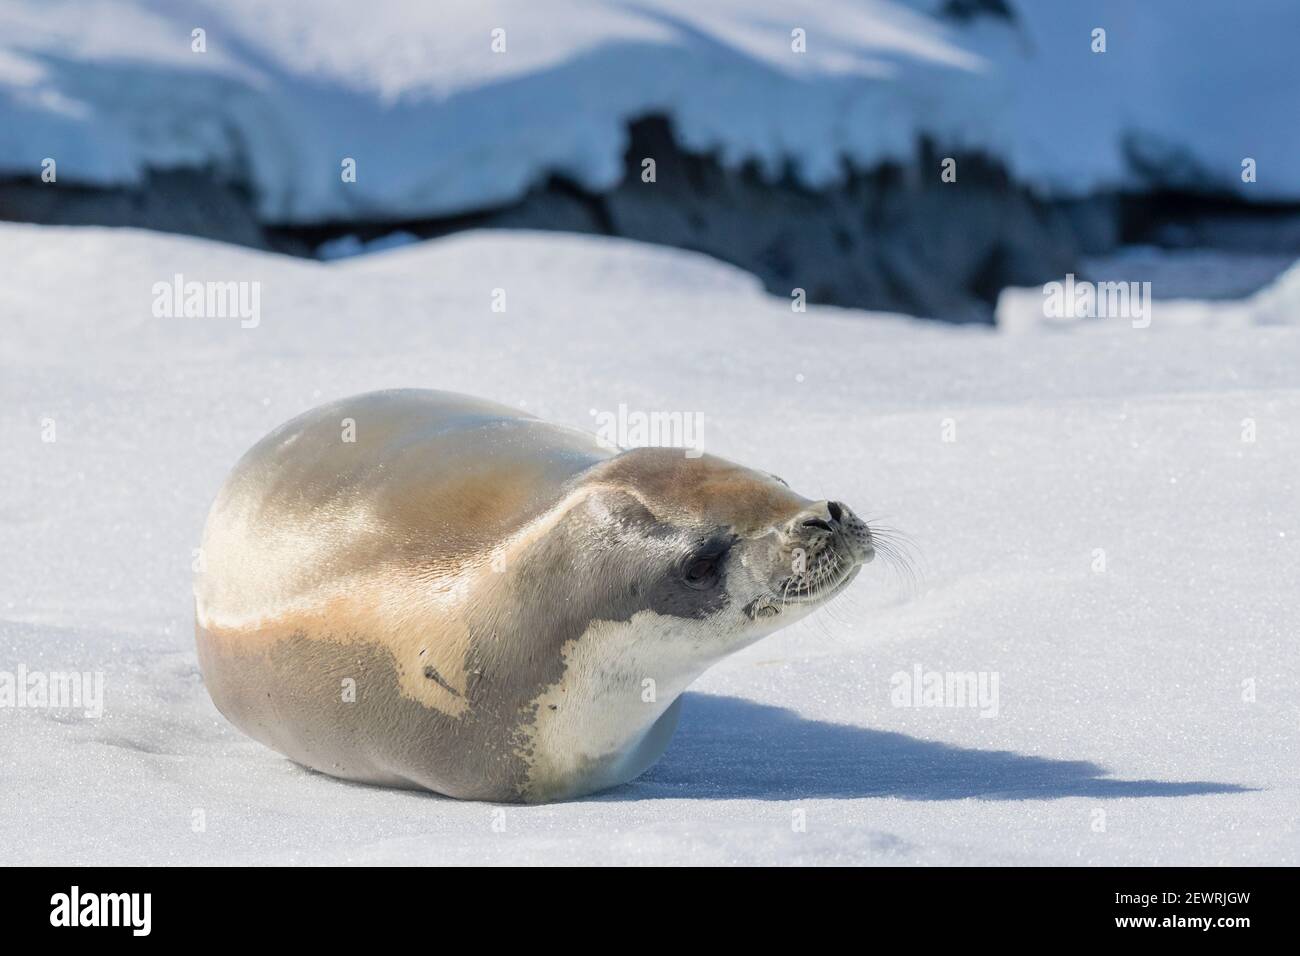 An adult crabeater seal (Lobodon carcinophaga), hauled out on sea ice in the Useful Islands, Gerlache Strait, Antarctica, Polar Regions Stock Photo